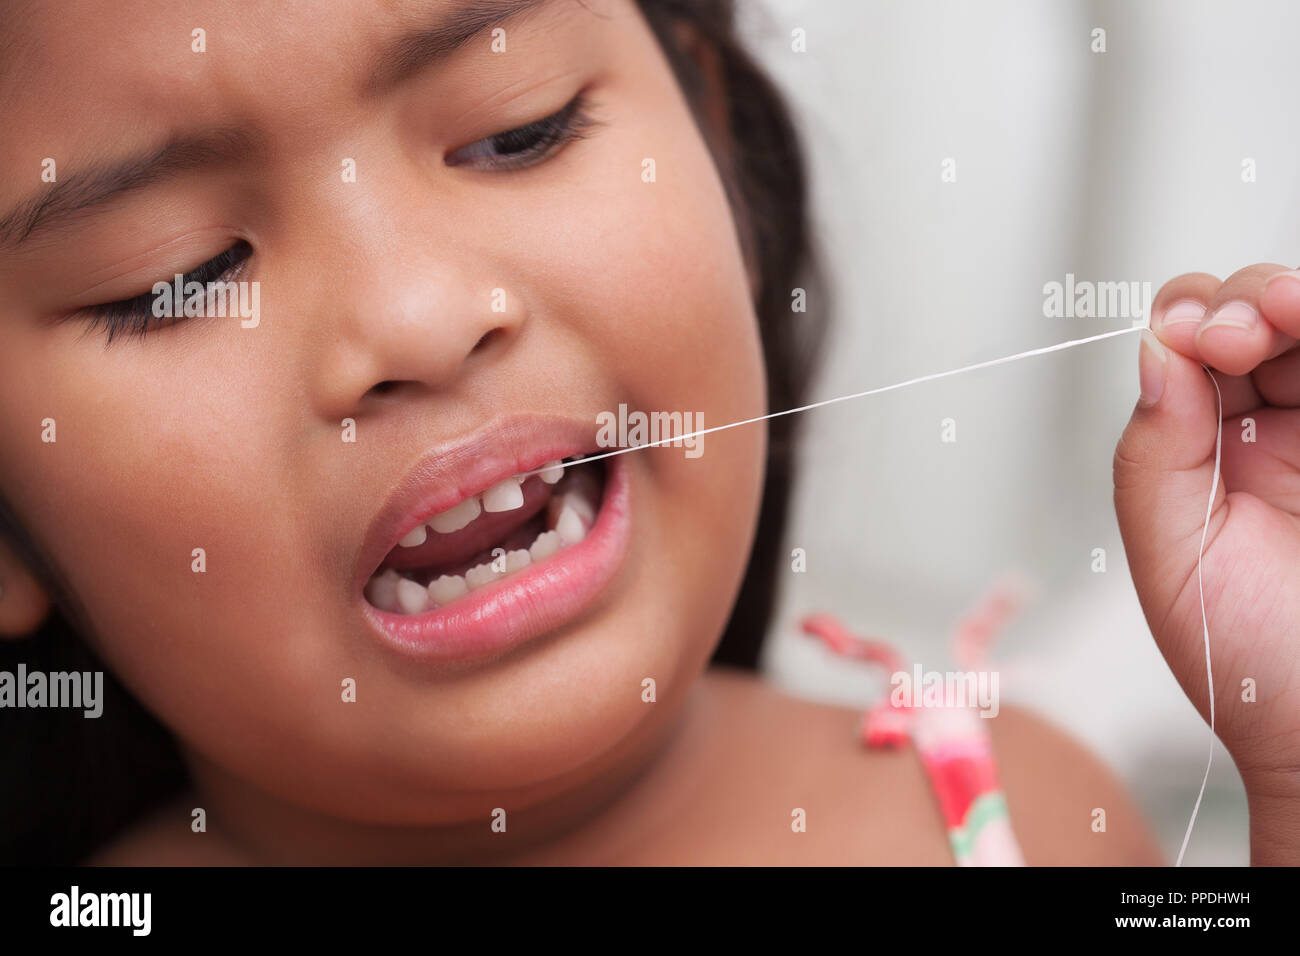 Scared little girl about to pull out her own front milk tooth, using floss string tied to the loose tooth Stock Photo